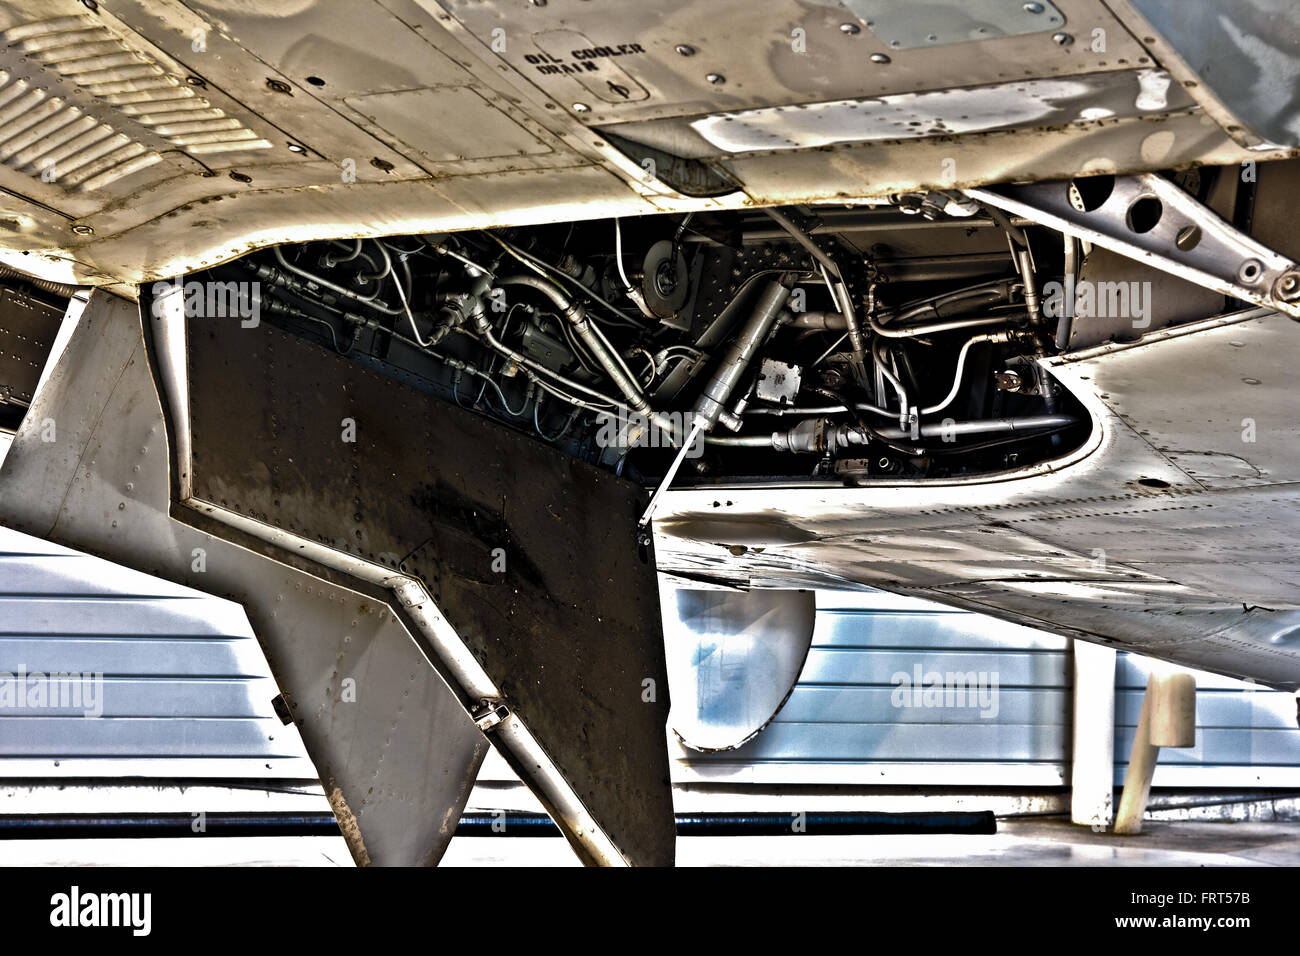 Detailed image of the landing gear bay of a fighter jet. Stock Photo